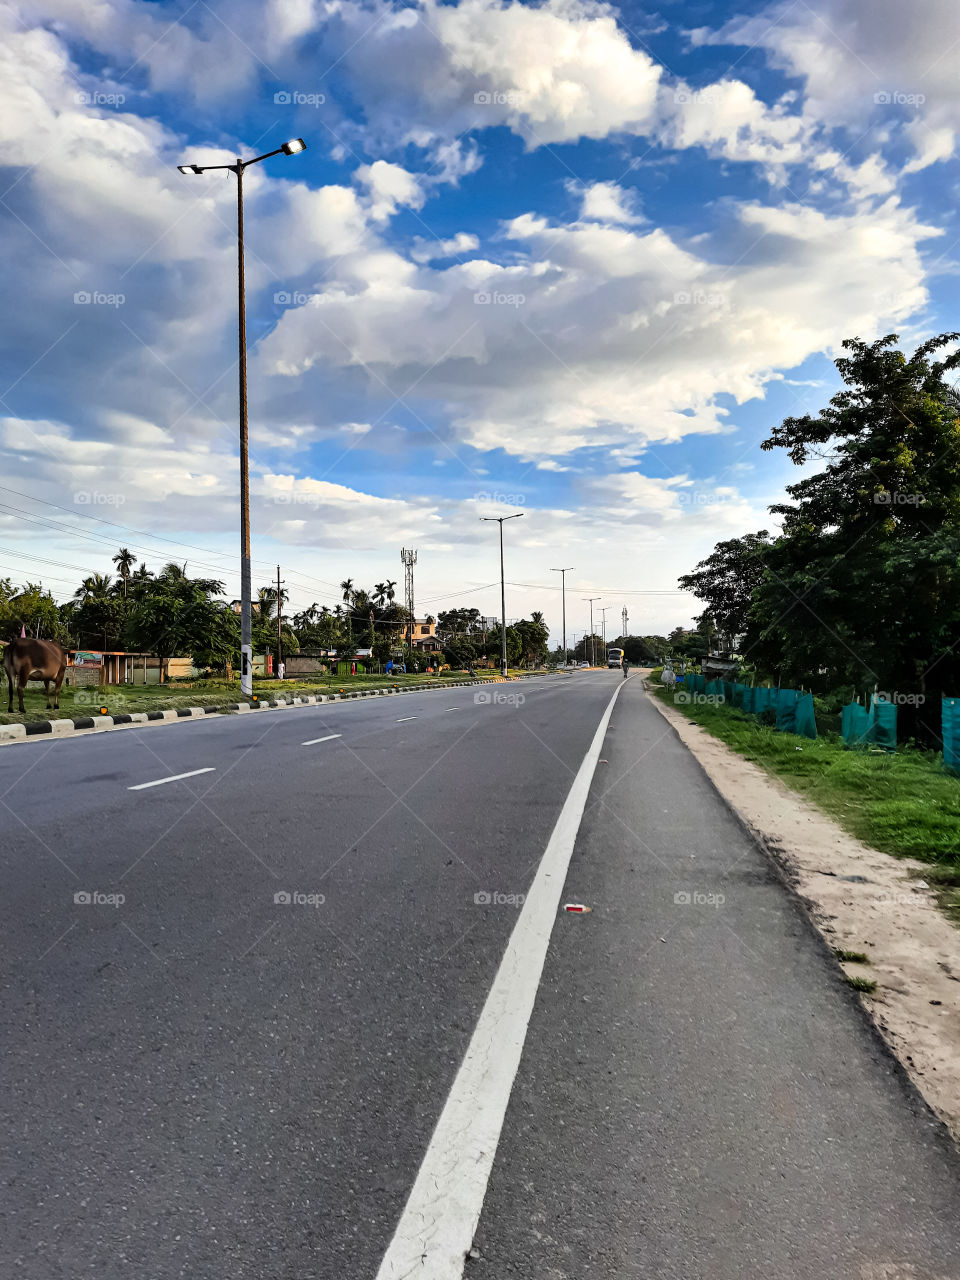 Photo of a national highway in India.. Photo captured after  lockdown... empty road.. less transportation... less vehicle... clear blue sky... clean enviroment...